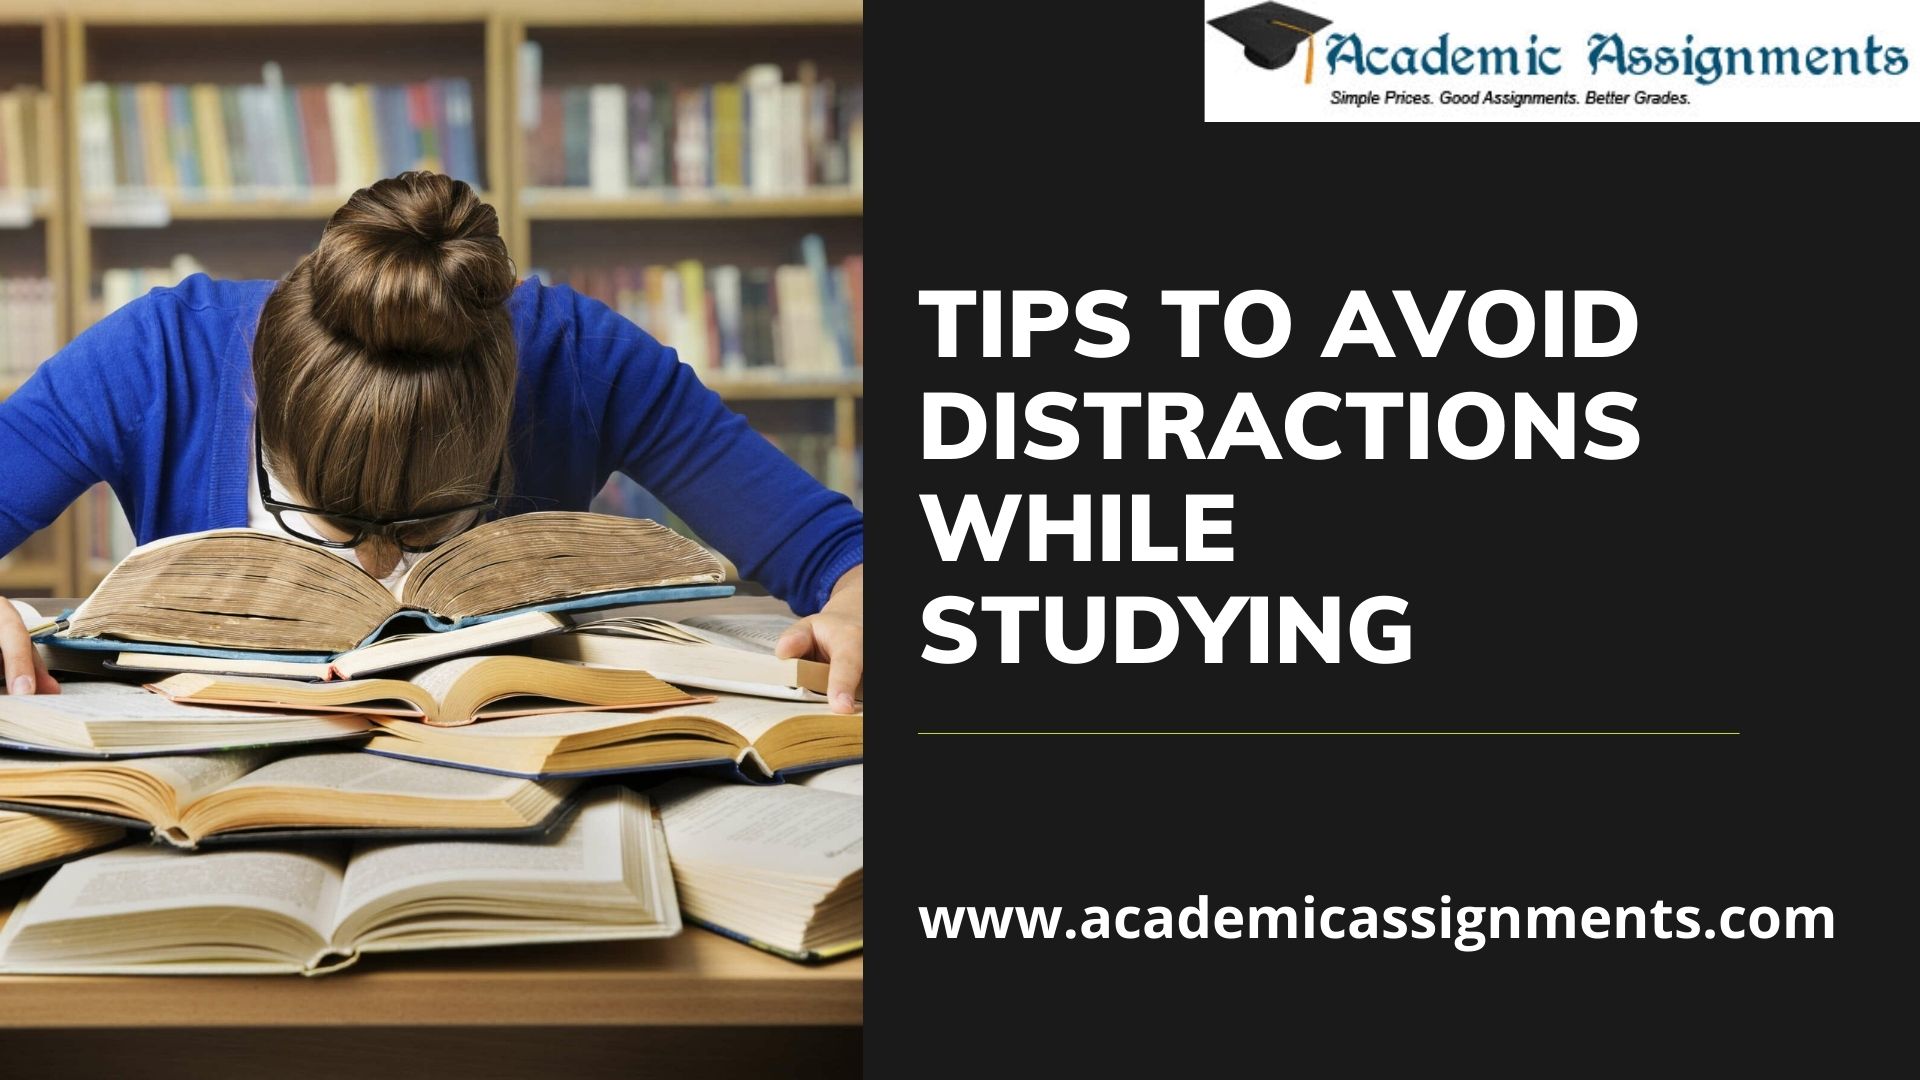 TIPS TO AVOID DISTRACTIONS WHILE STUDYING